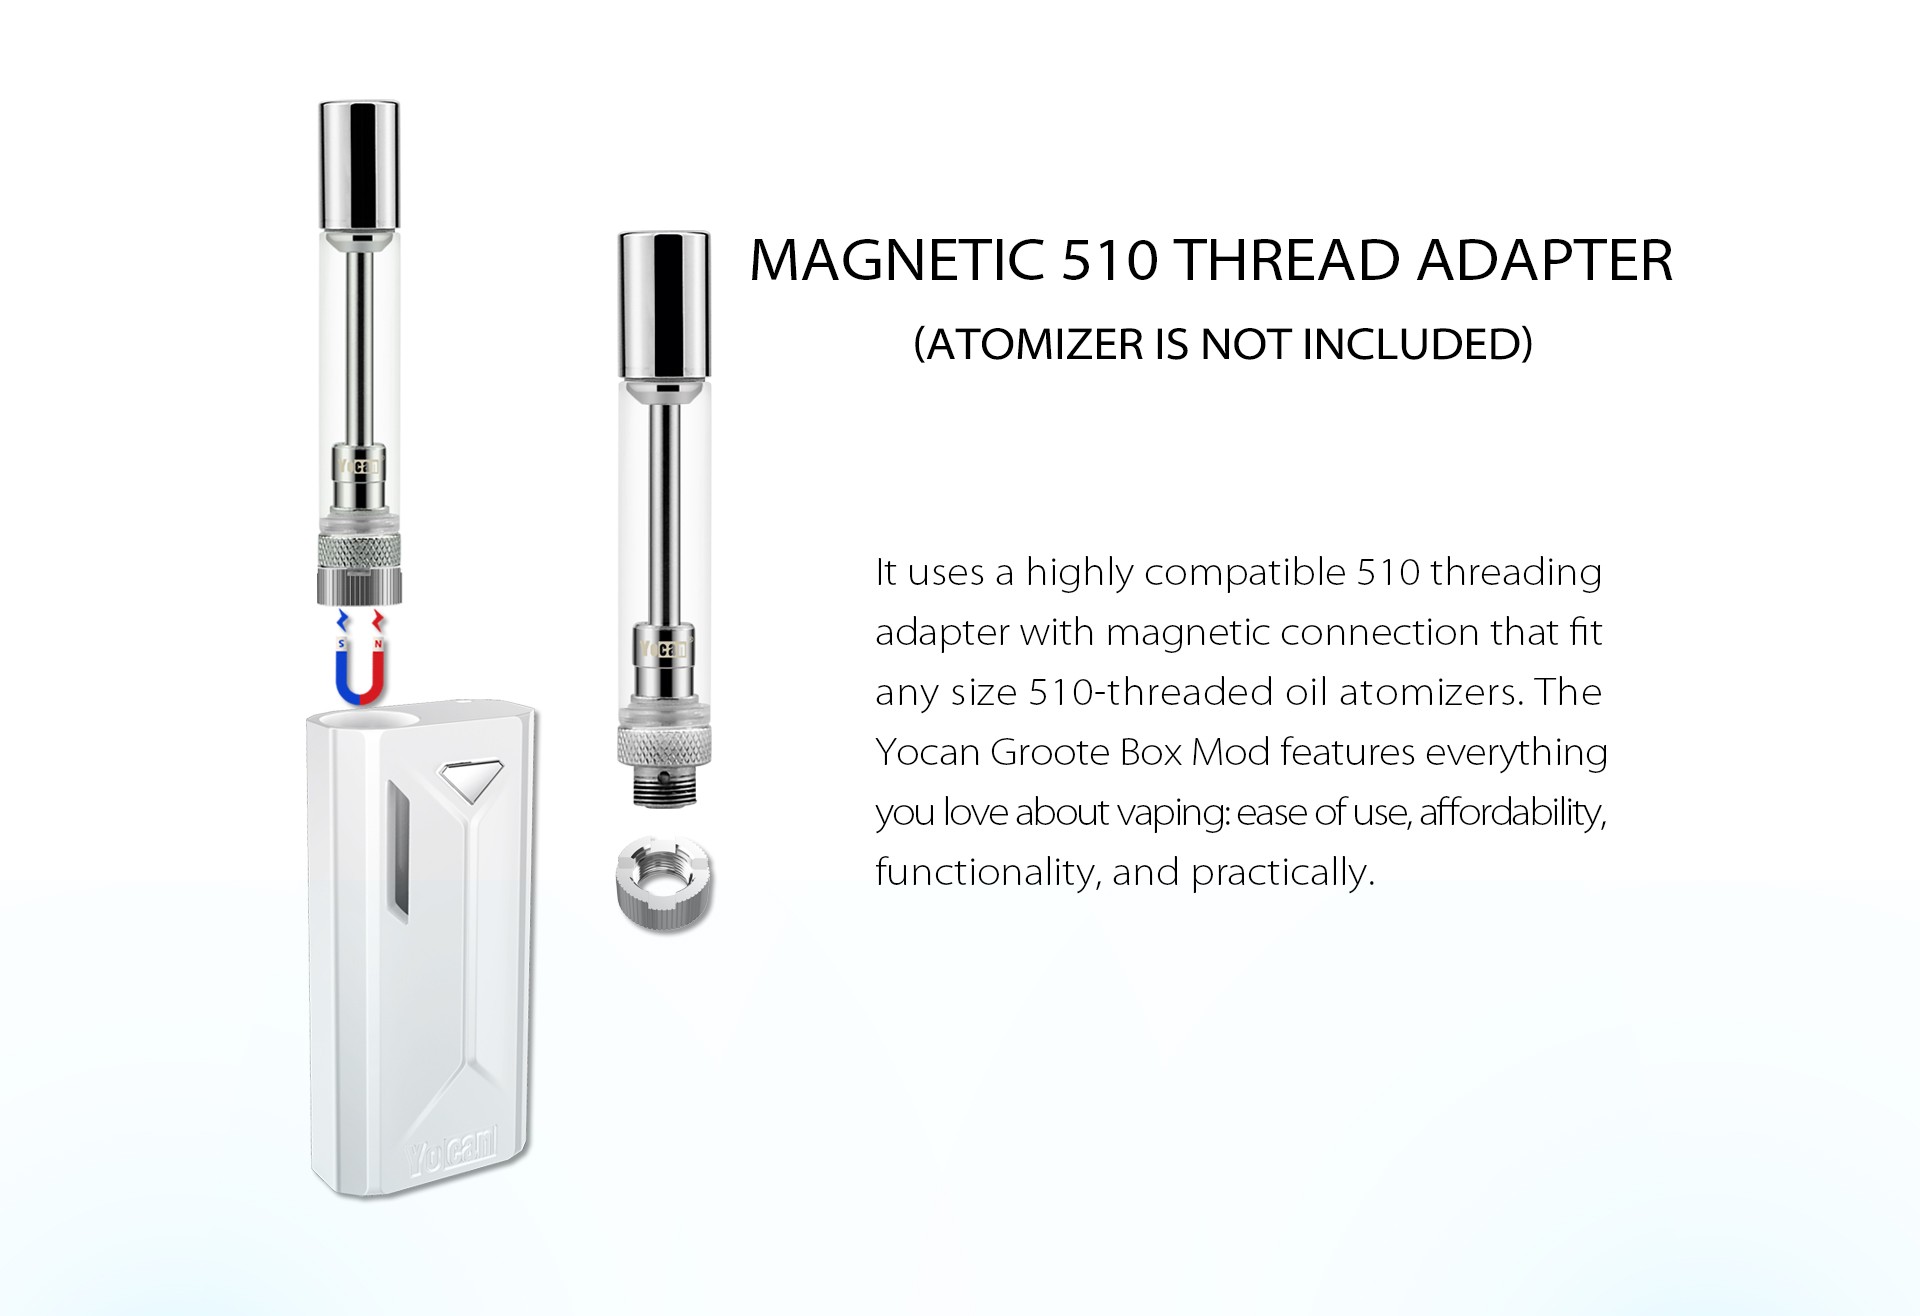 Yocan Groote box mod Magnetic 510 Thread Adapter